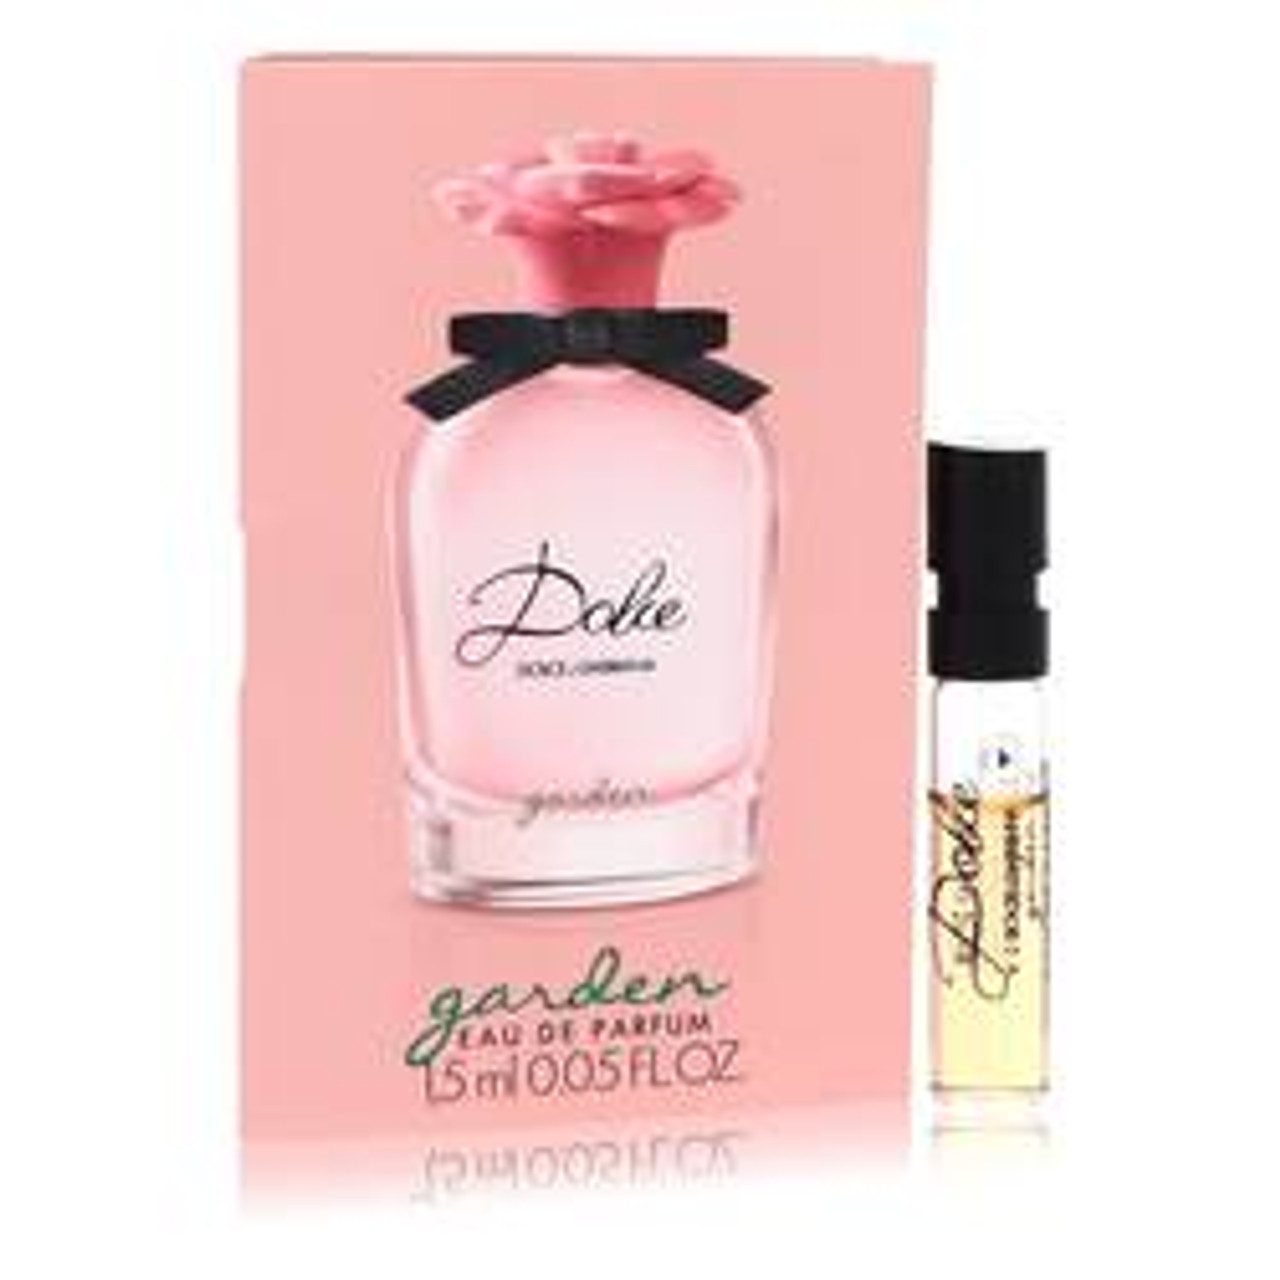 Dolce Garden Perfume By Dolce & Gabbana Vial (sample) 0.05 oz for Women - [From 11.00 - Choose pk Qty ] - *Ships from Miami